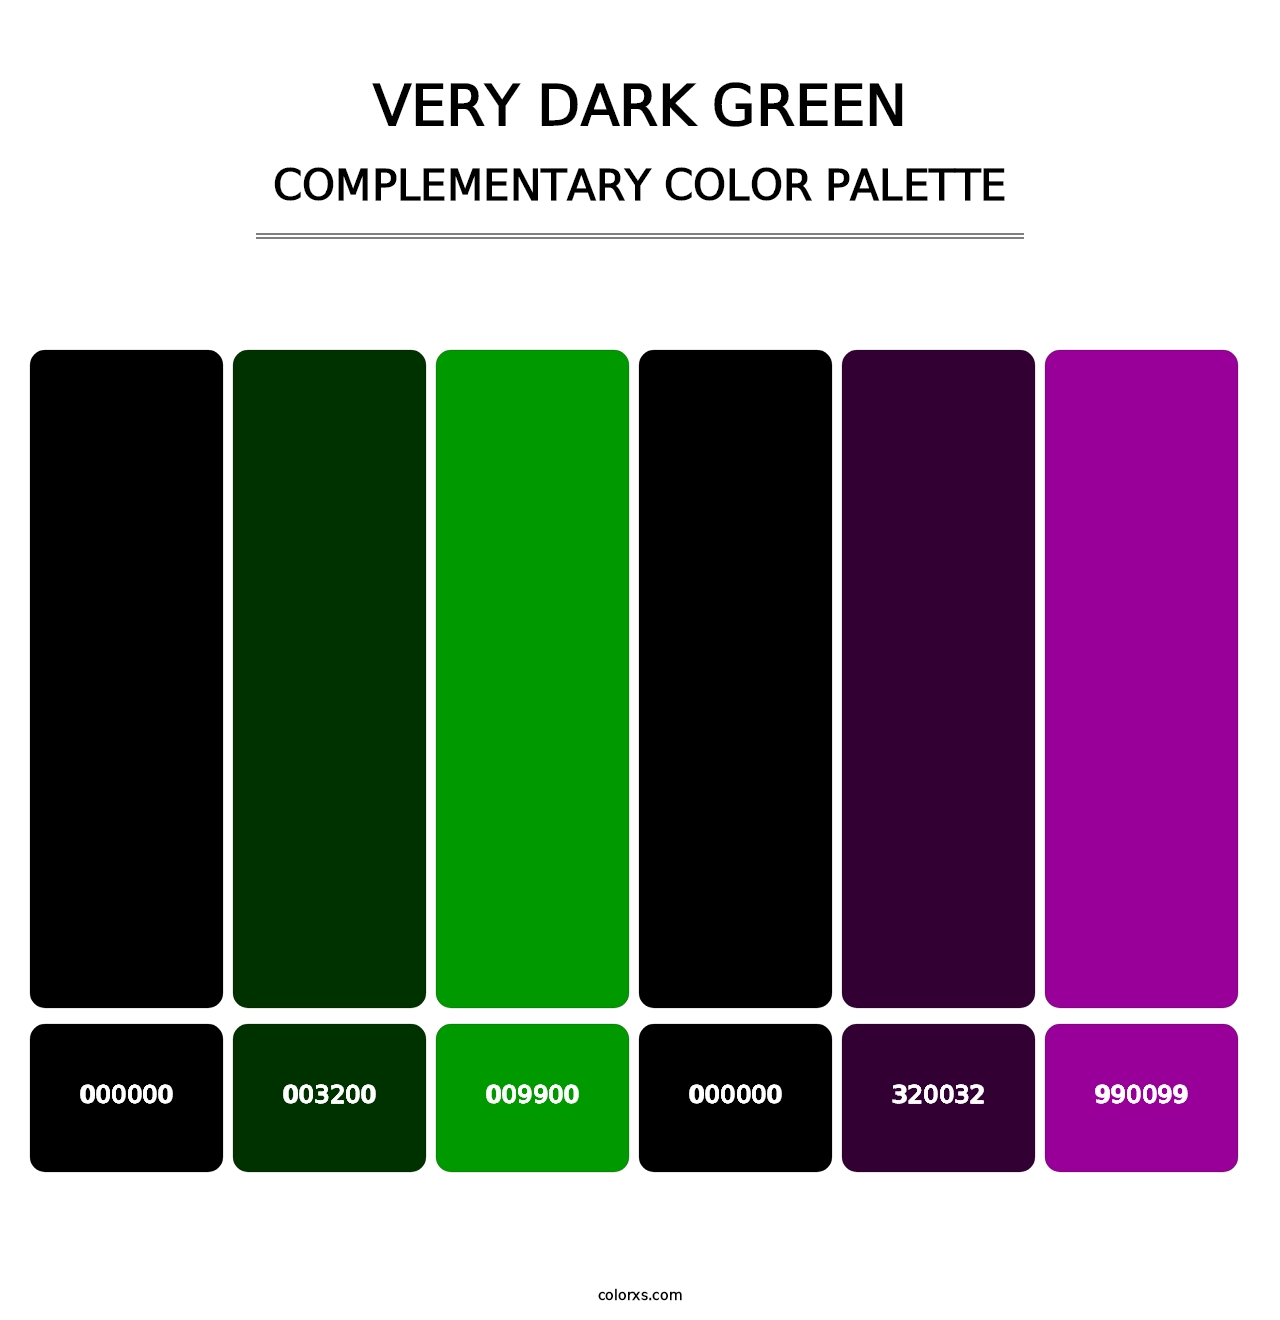 Very Dark Green - Complementary Color Palette